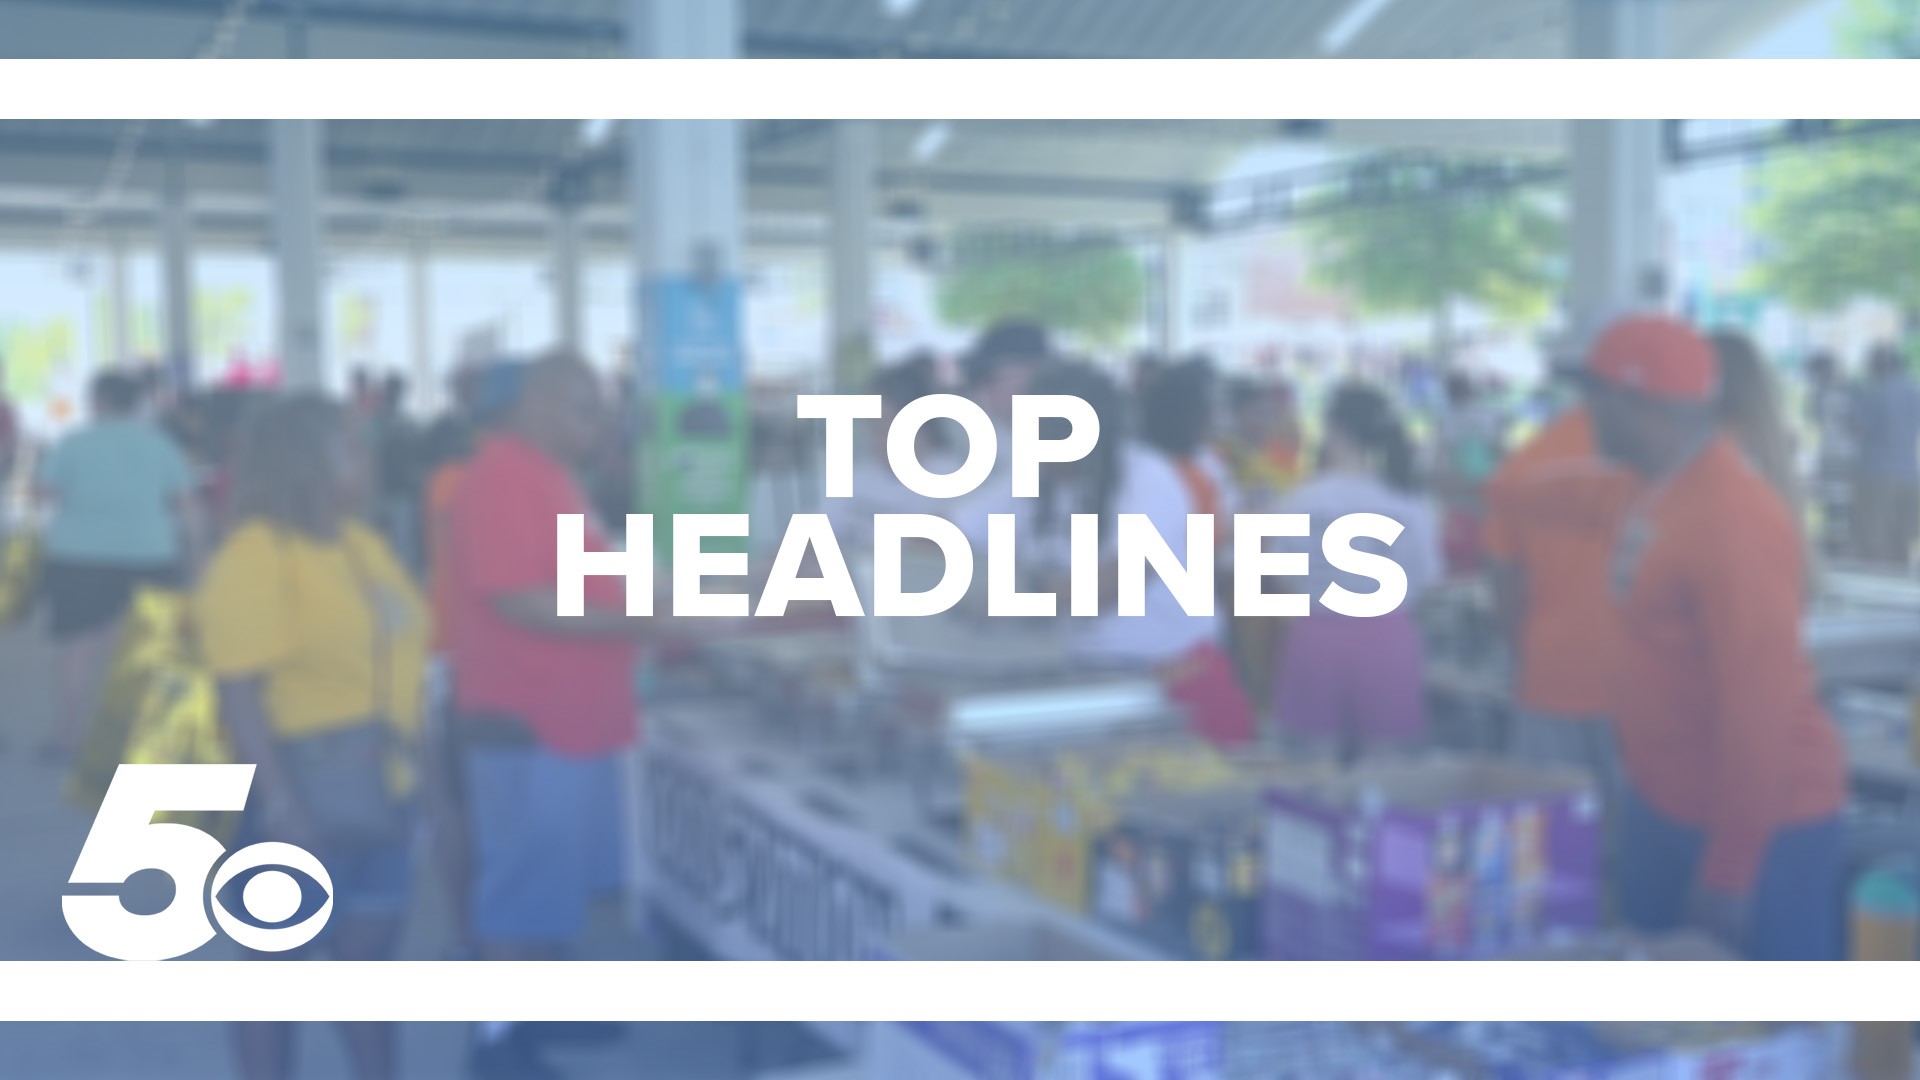 Check out today's top headlines including weather, Juneteenth celebrations in the area, and more!